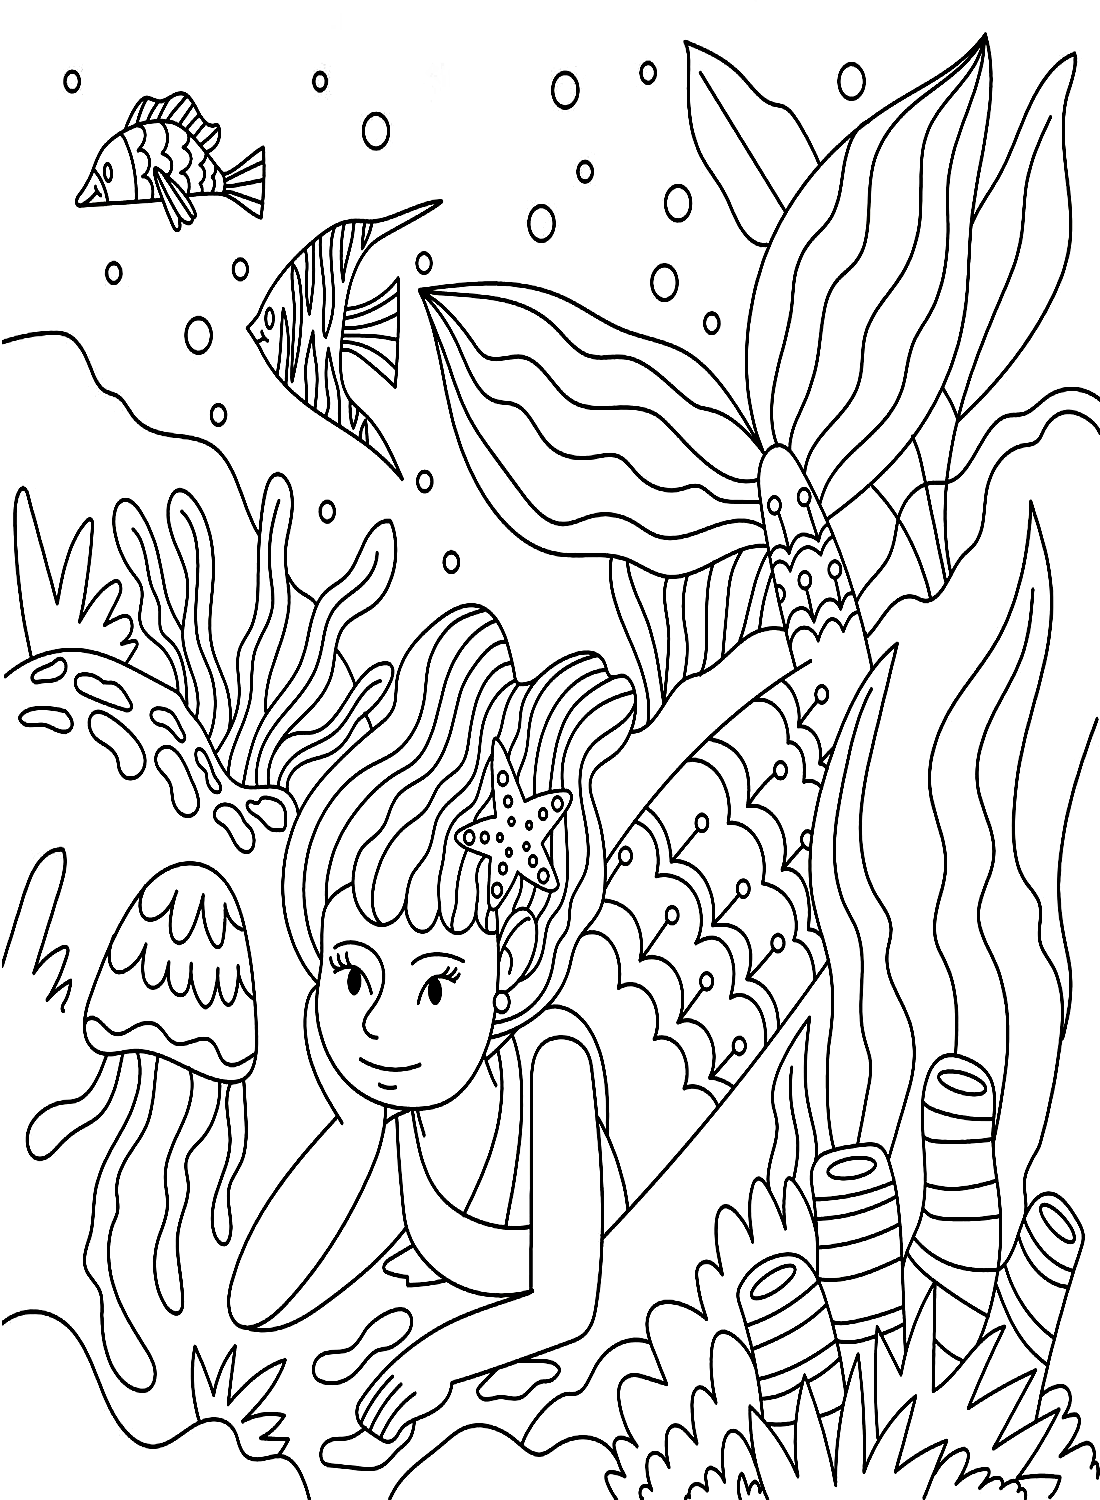 Coral and Mermaid Coloring Page